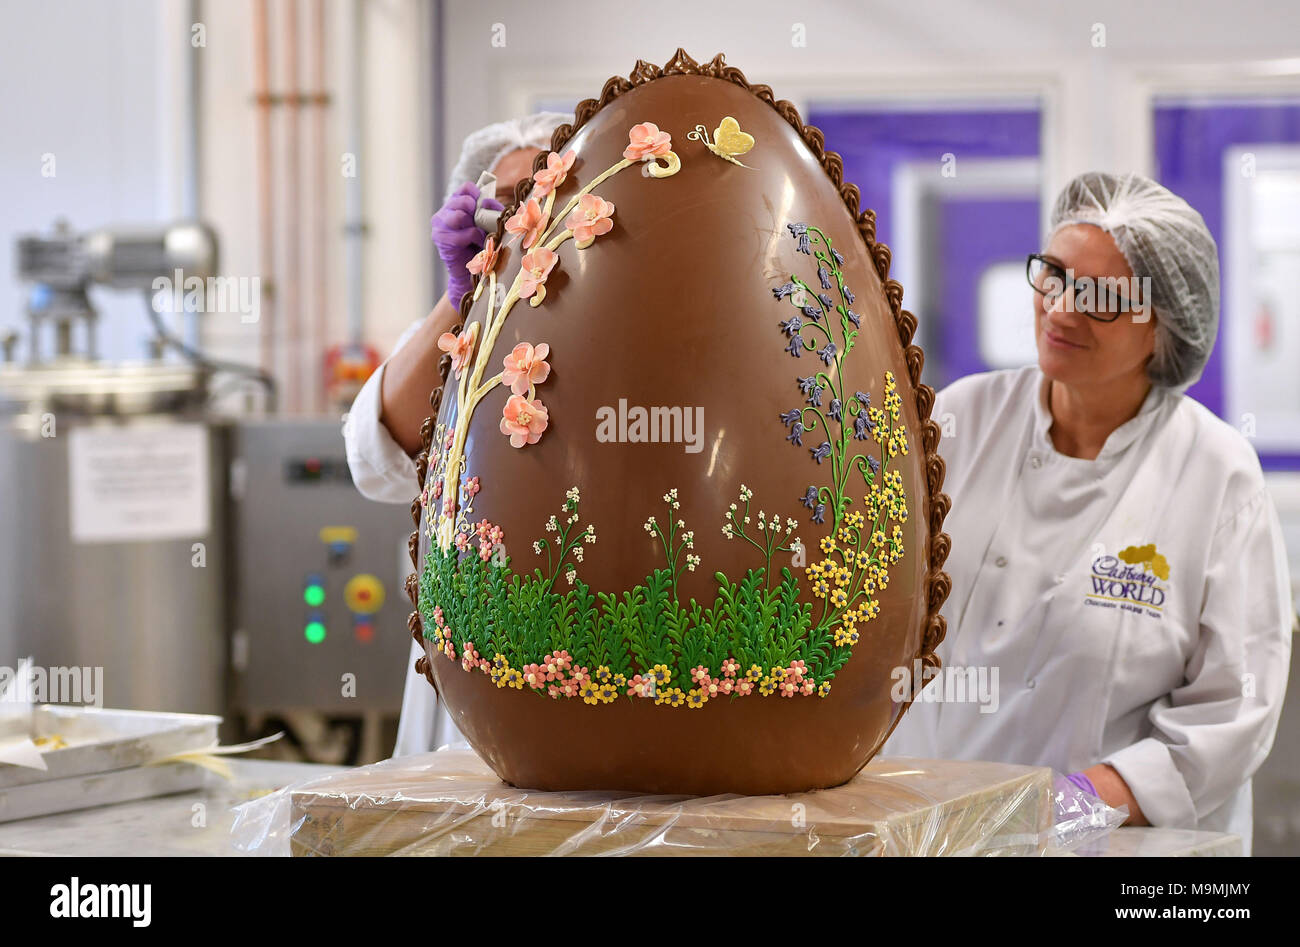 STANDALONE IMAGE Chocolatier Donna Oluban inspects the decoration